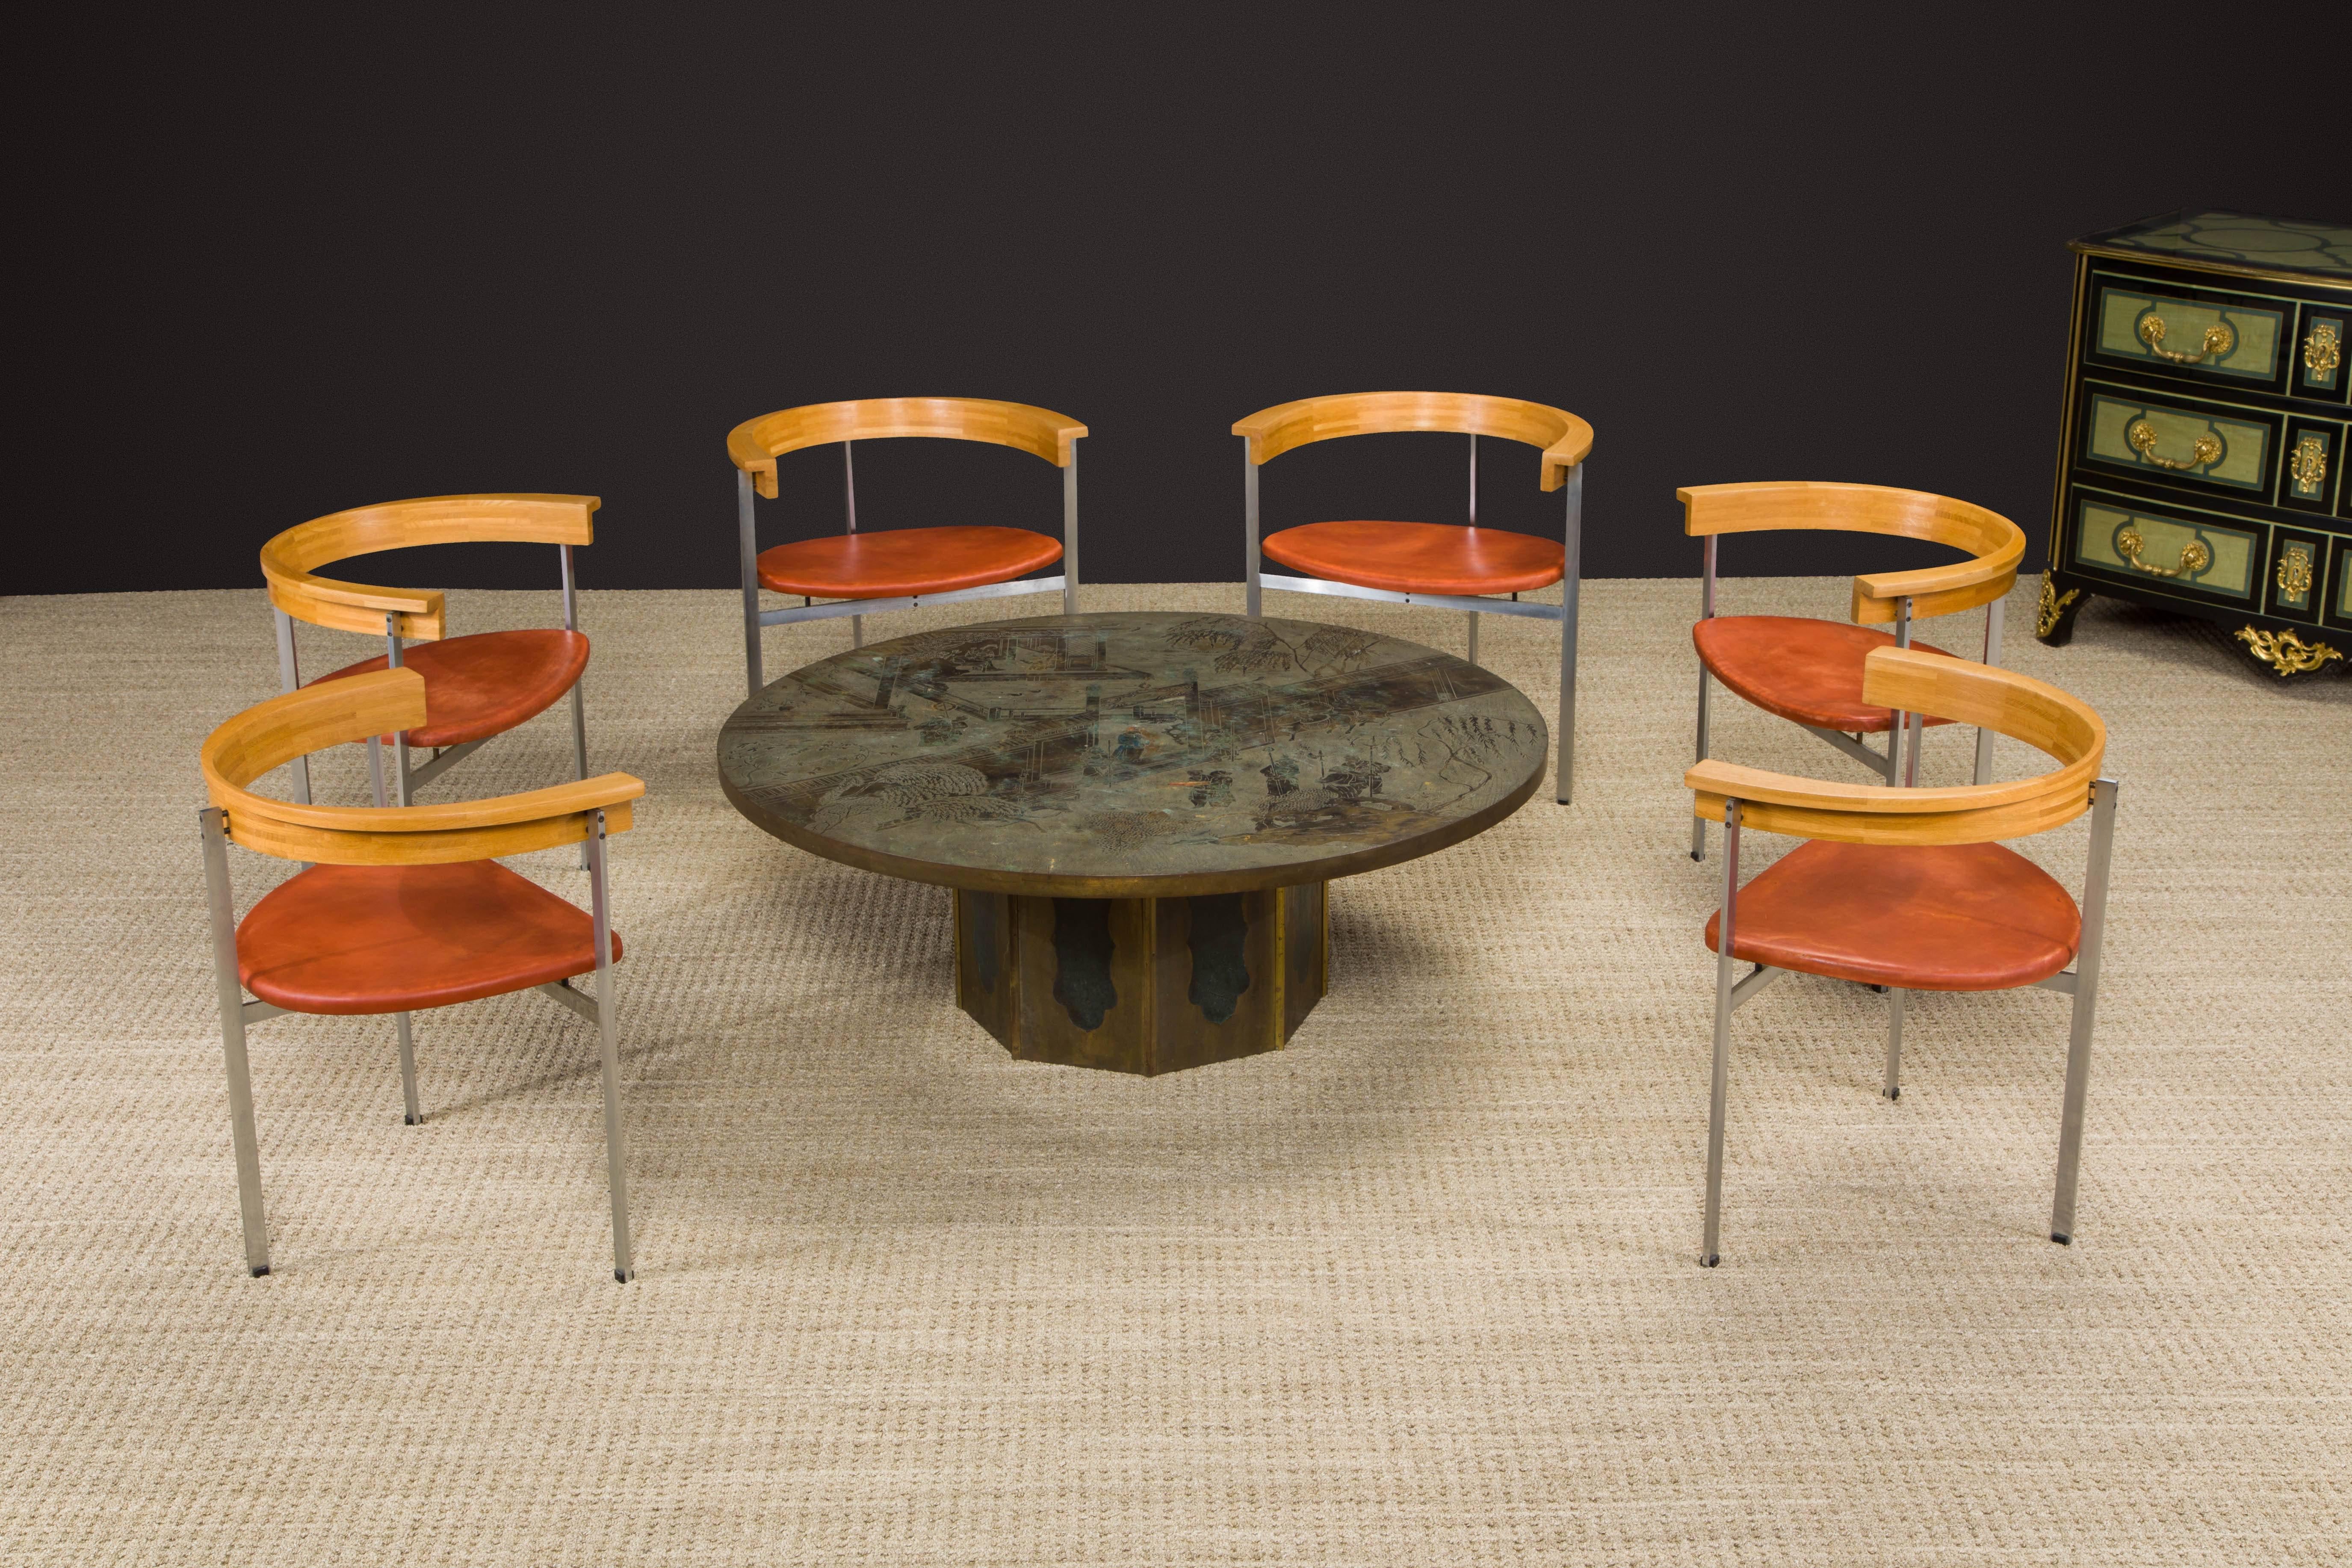 Steel 'PK-11' Armchairs by Poul Kjærholm for EKC, Set of Six, Denmark c. 1957, Signed For Sale